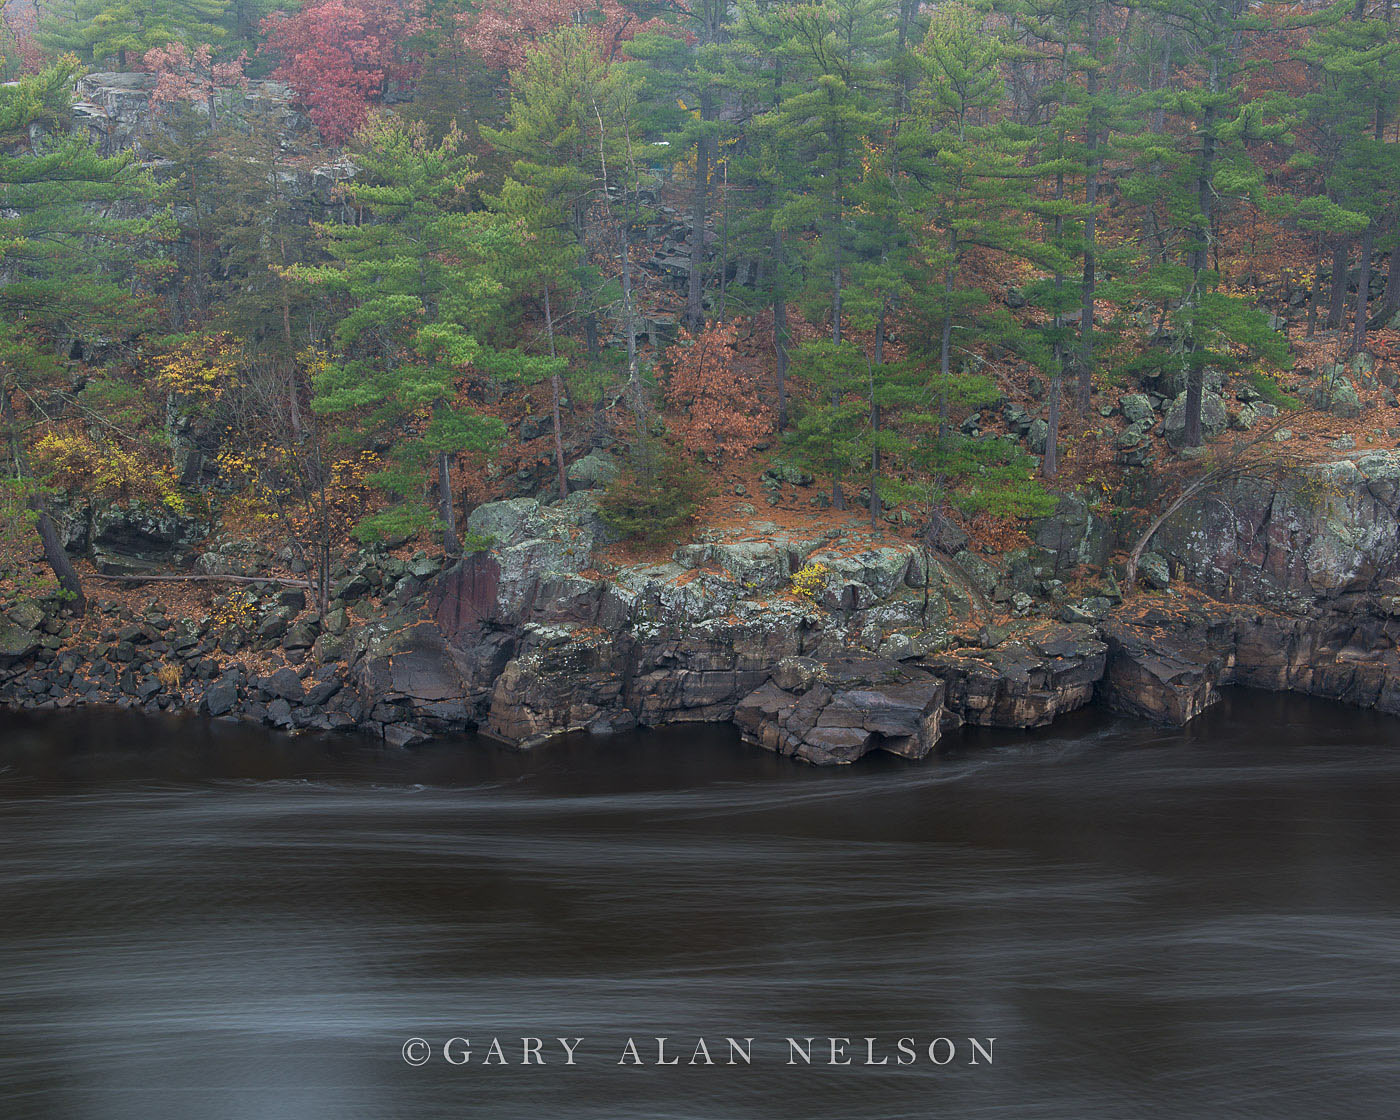 Fog and swirling water along the Dalles of the St. Croix National Scenic River, Minesota/Wisconsin